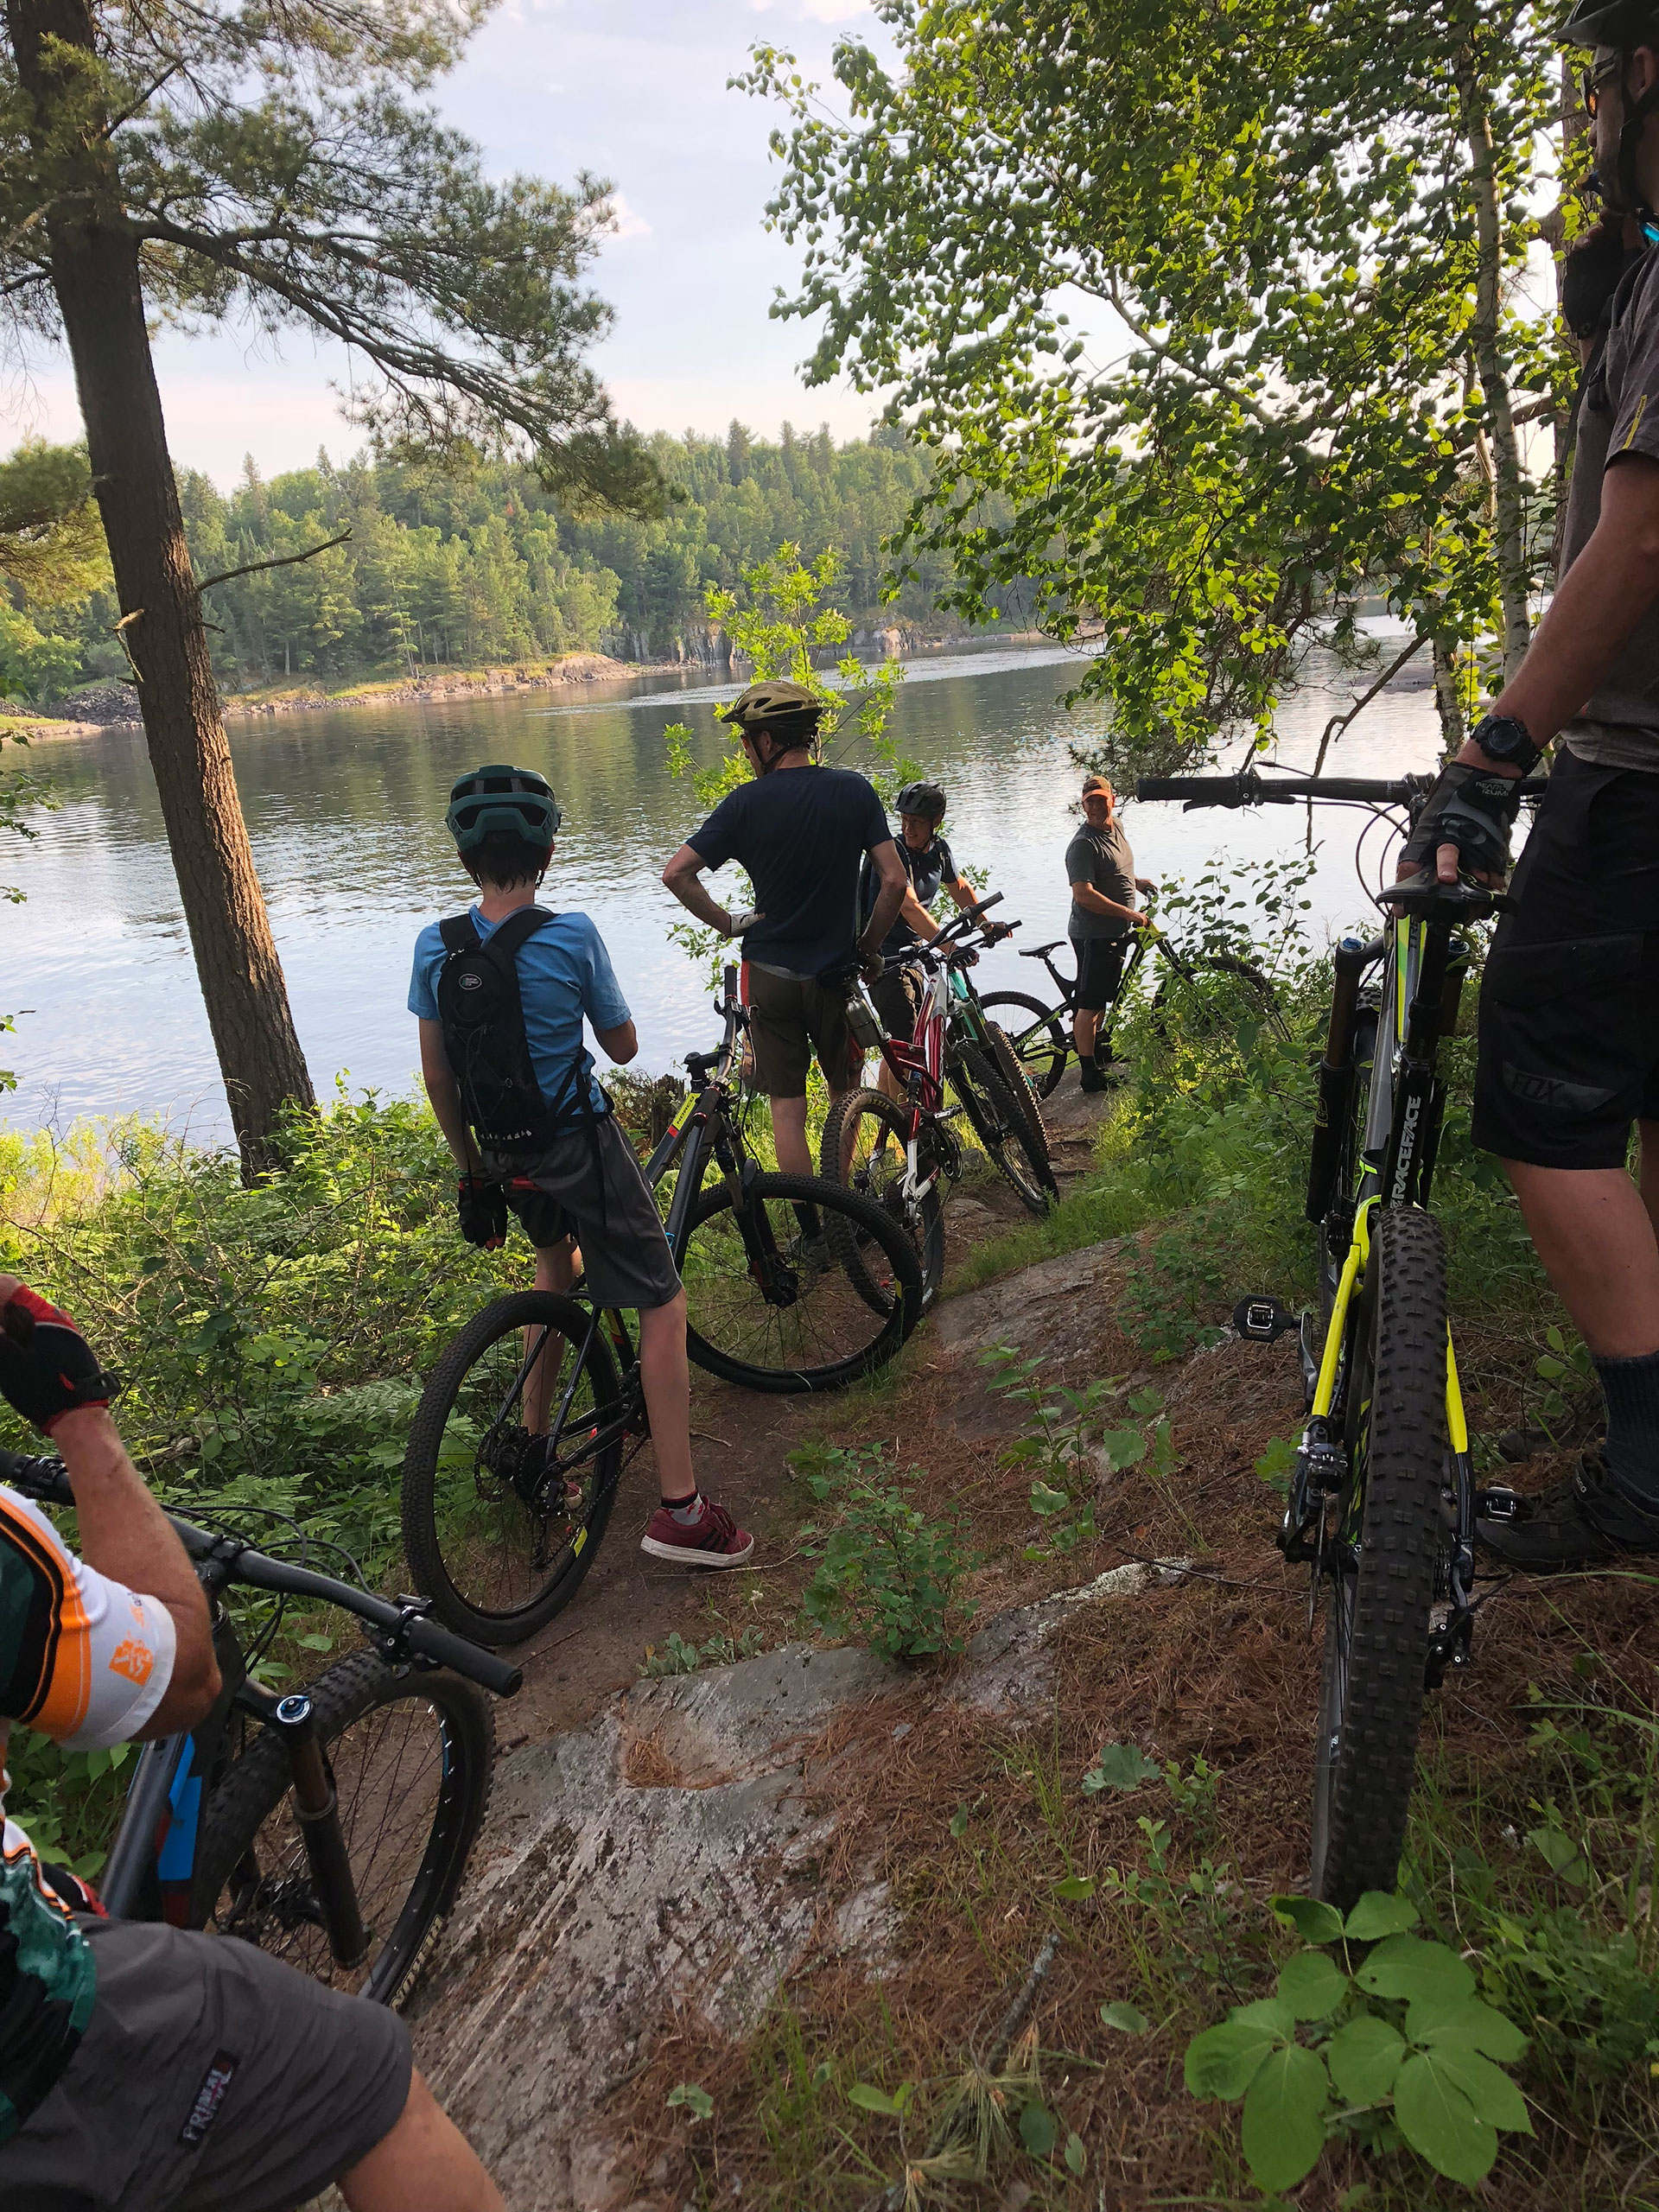 a group of cyclists pause during their ride to look out over a lake